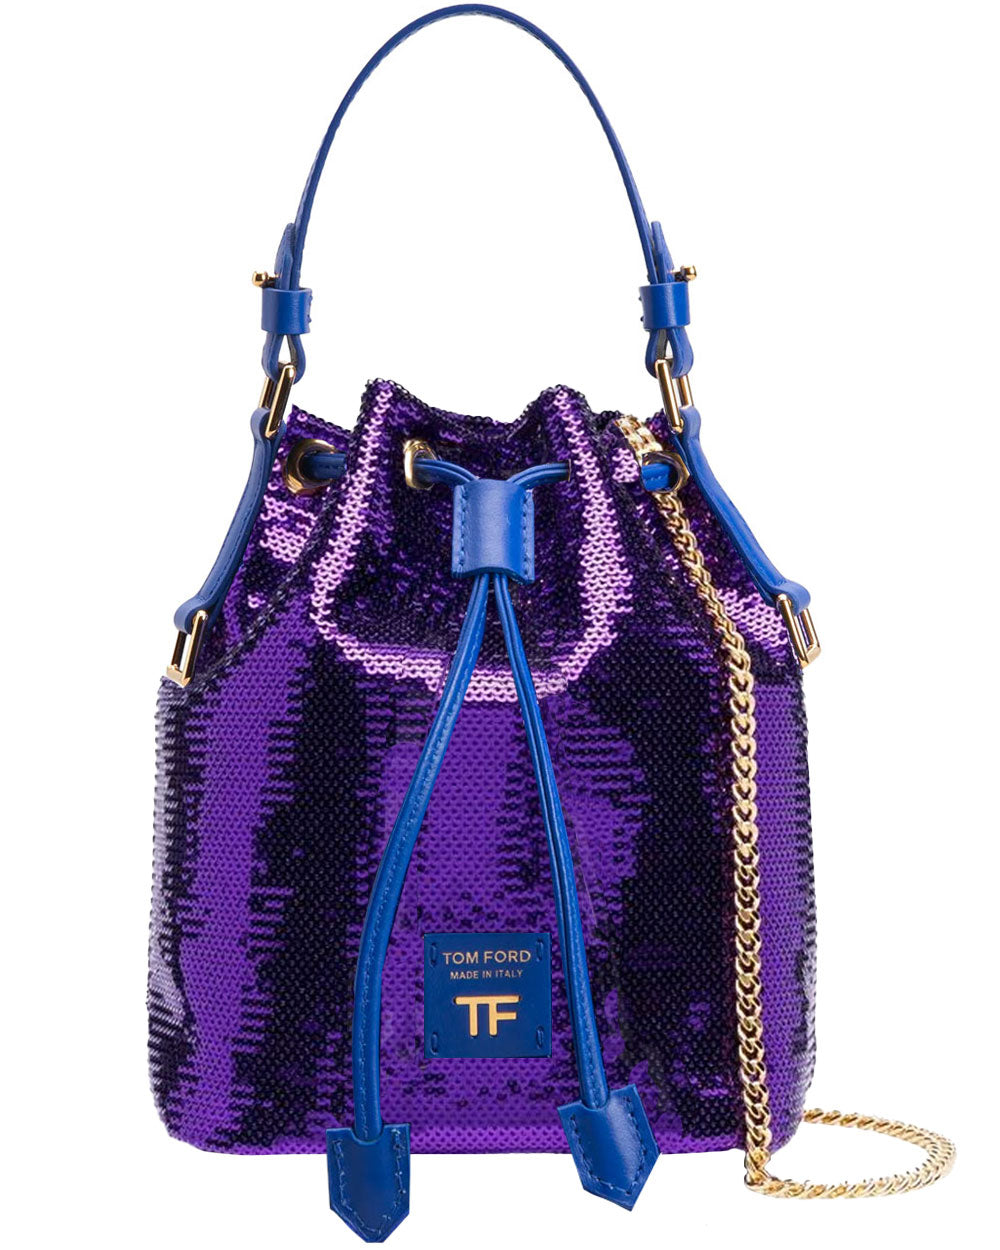 Small Sequins Bucket Bag in Violet and Ocean